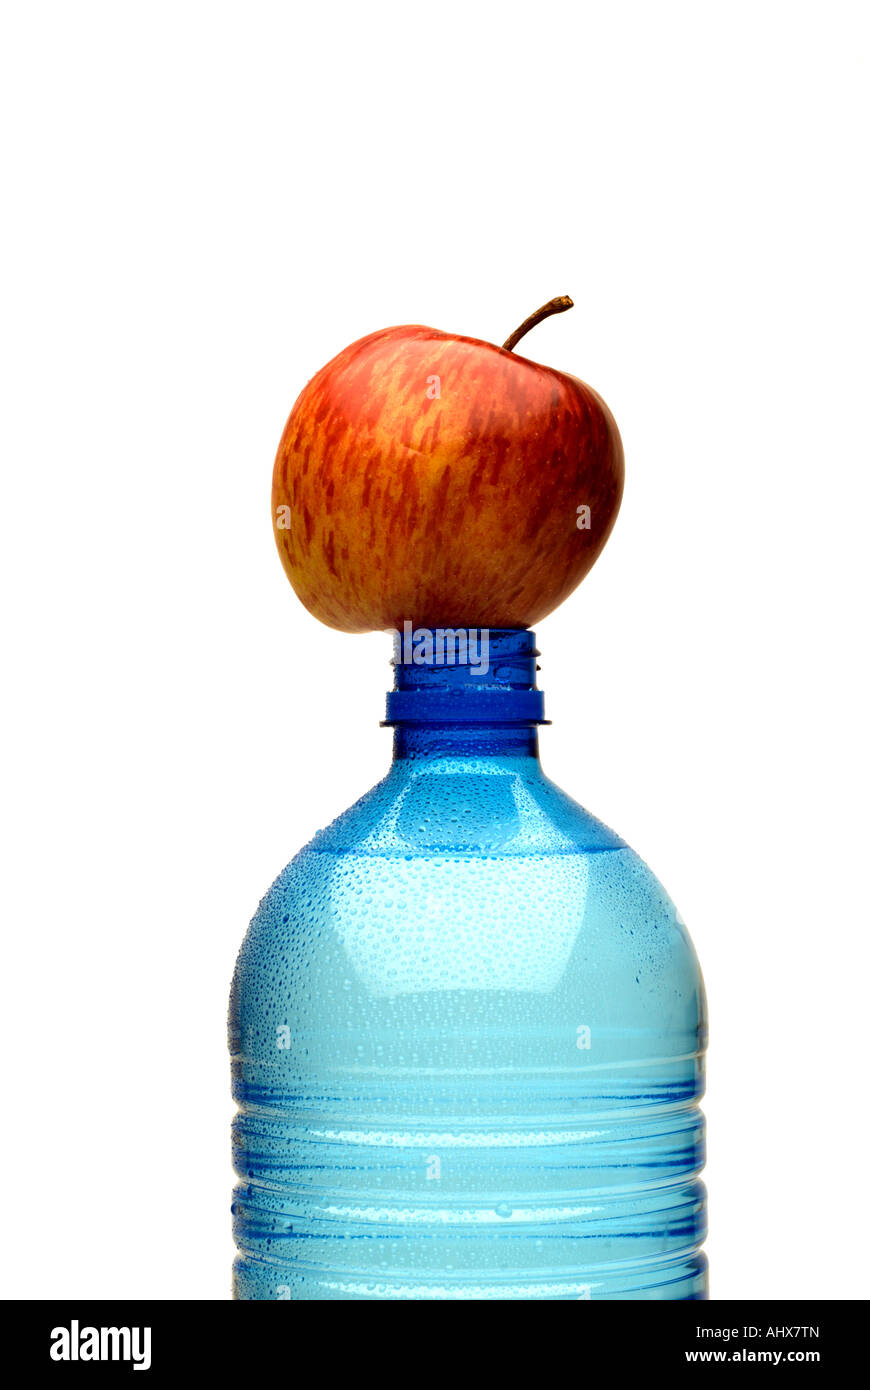 Water bottle and Apple, fruit and healthy lifestyle, area for text. Stock Photo